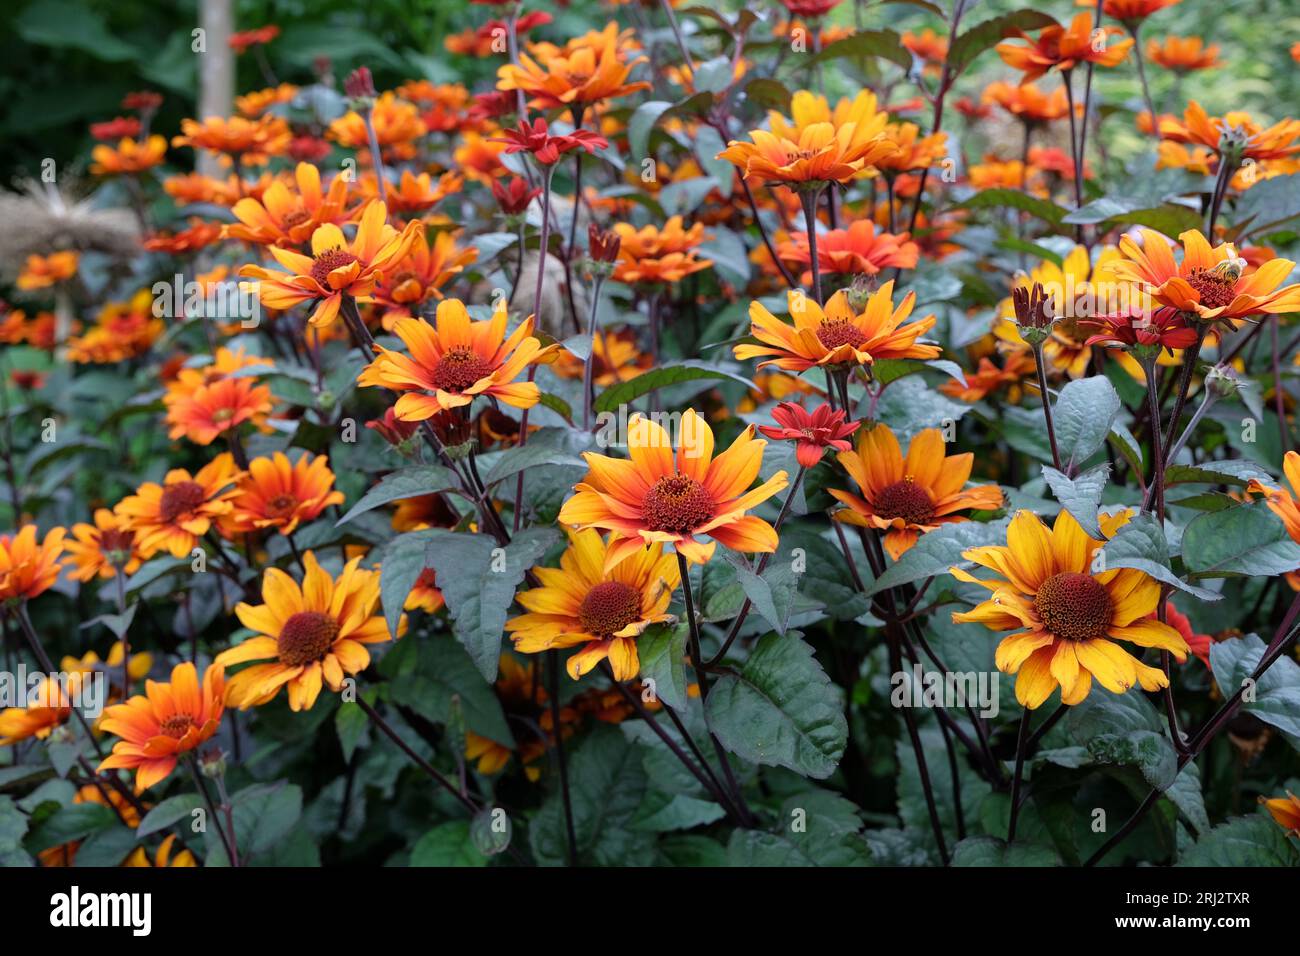 The red and orange false sunflower, Heliopsis helianthoides 'Bleeding Hearts' in bloom. Stock Photo